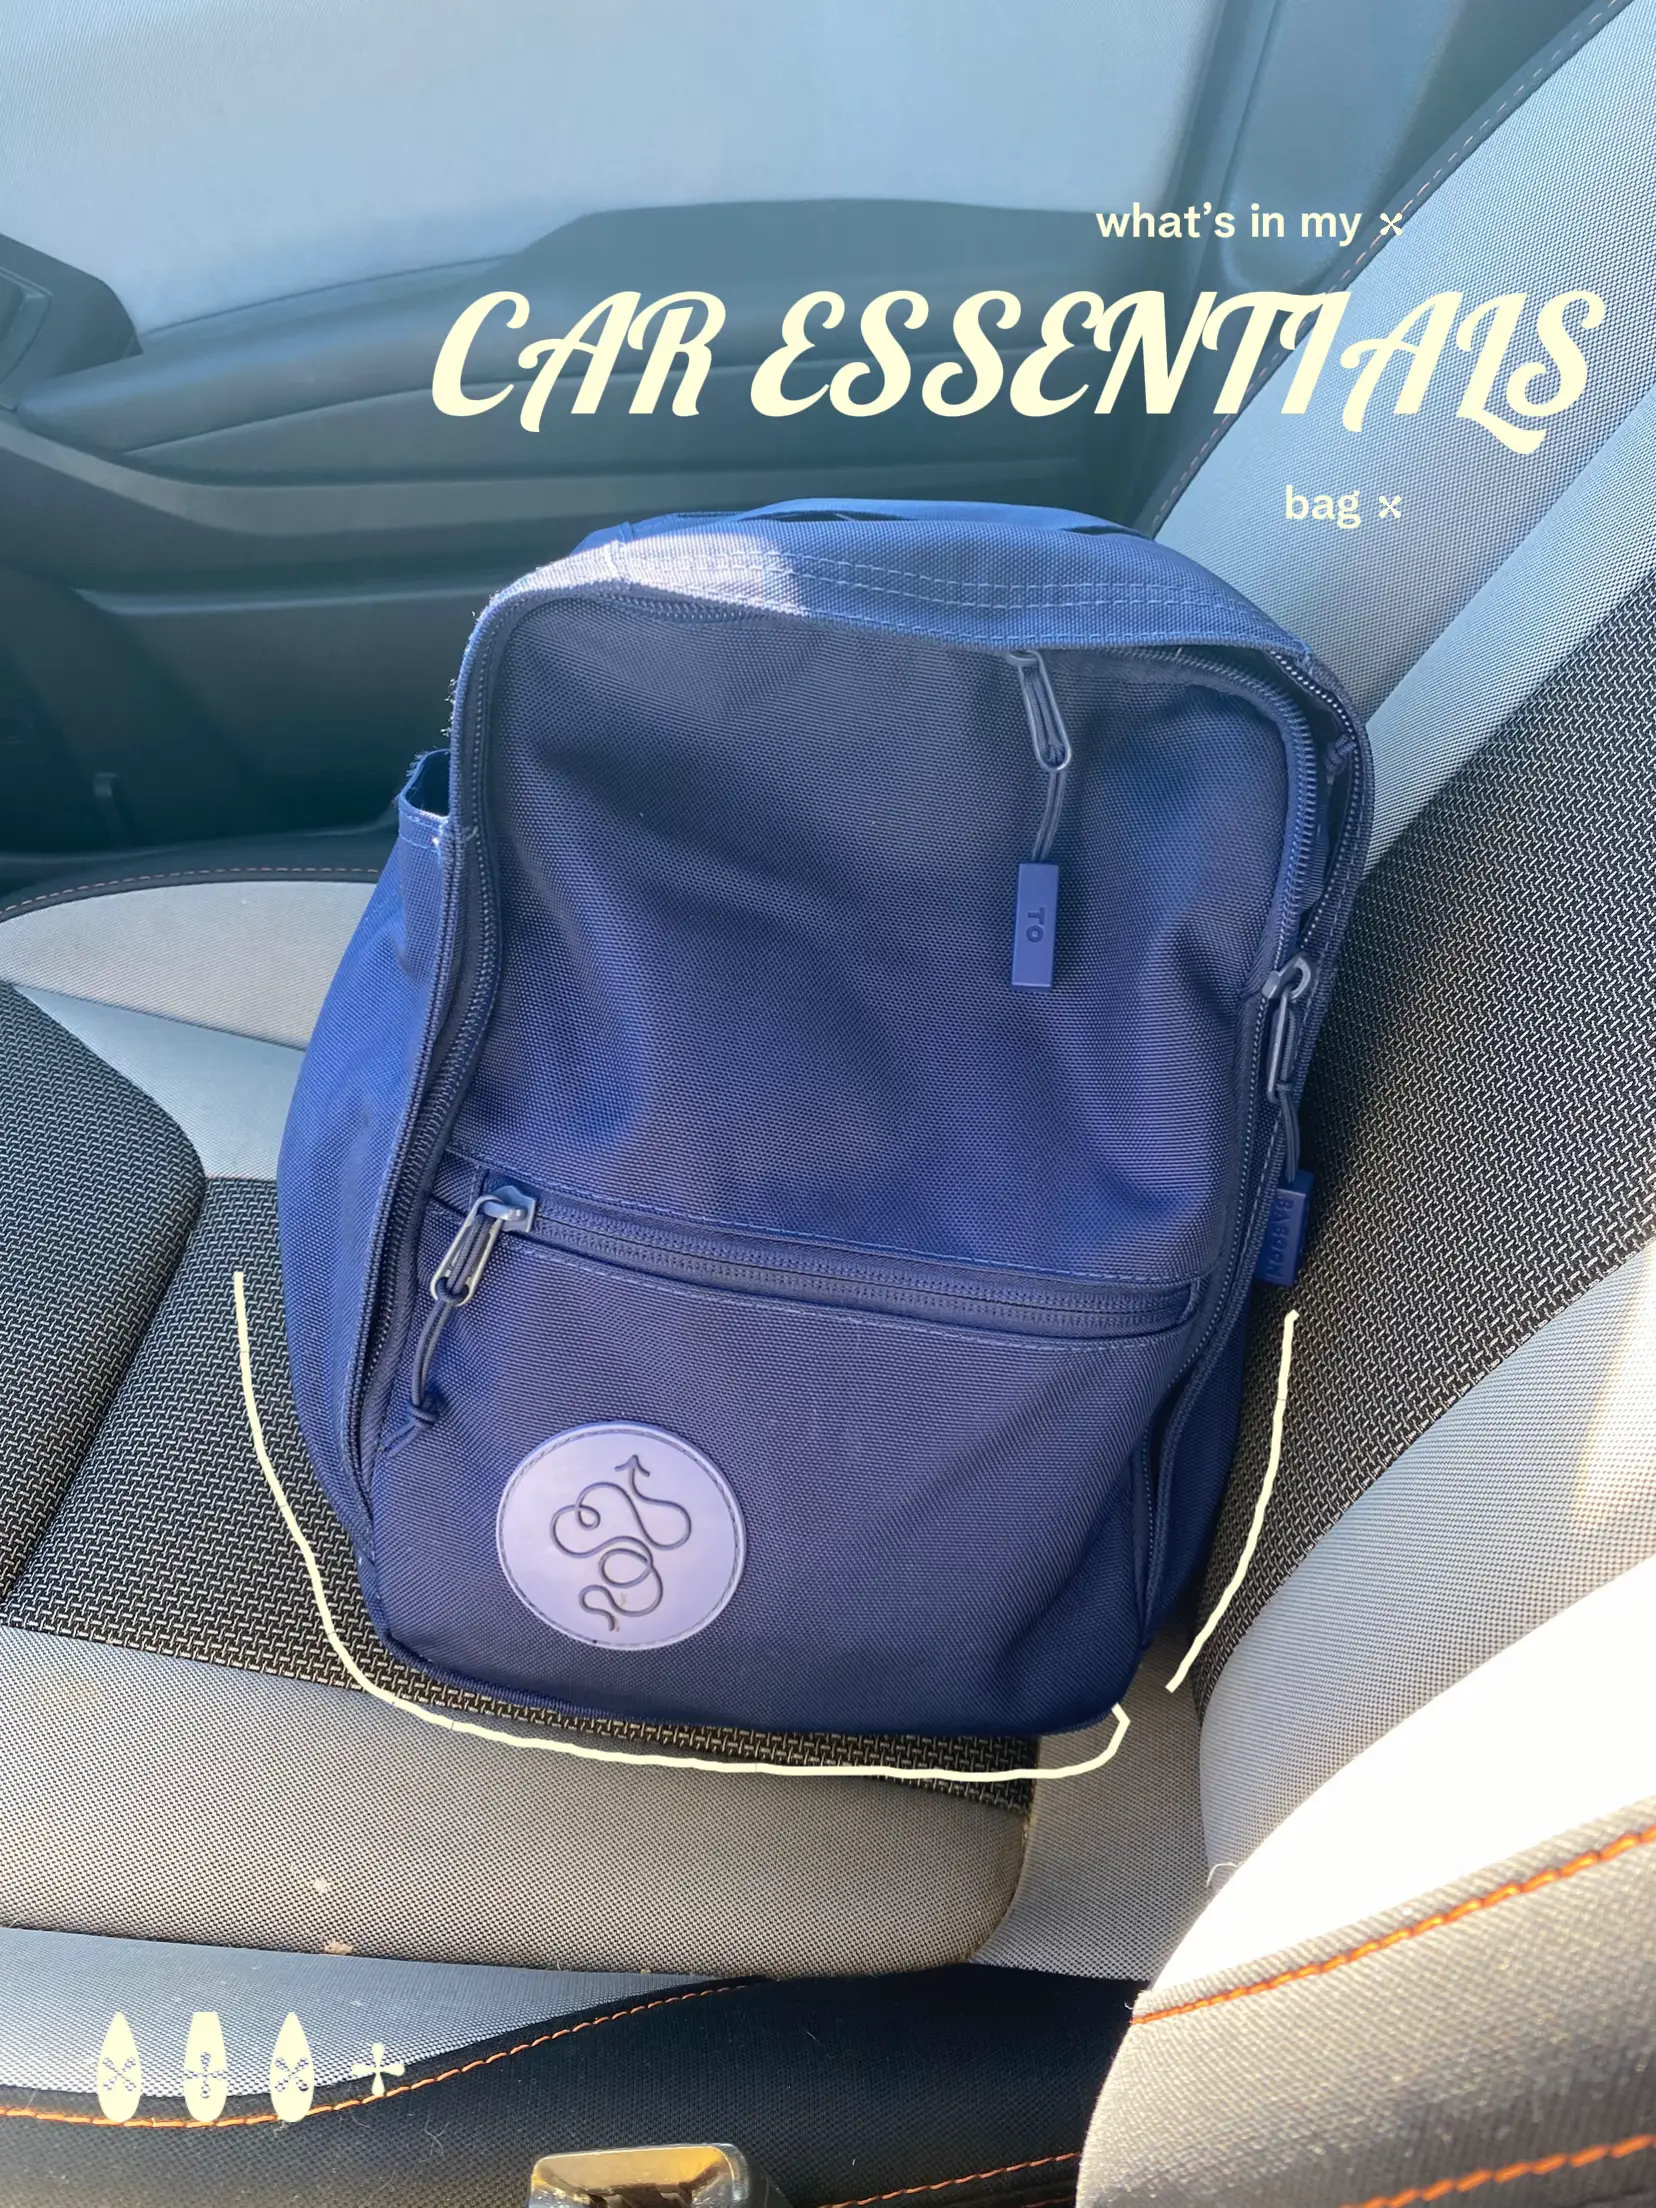 CAR ESSENTIALS, Gallery posted by meg